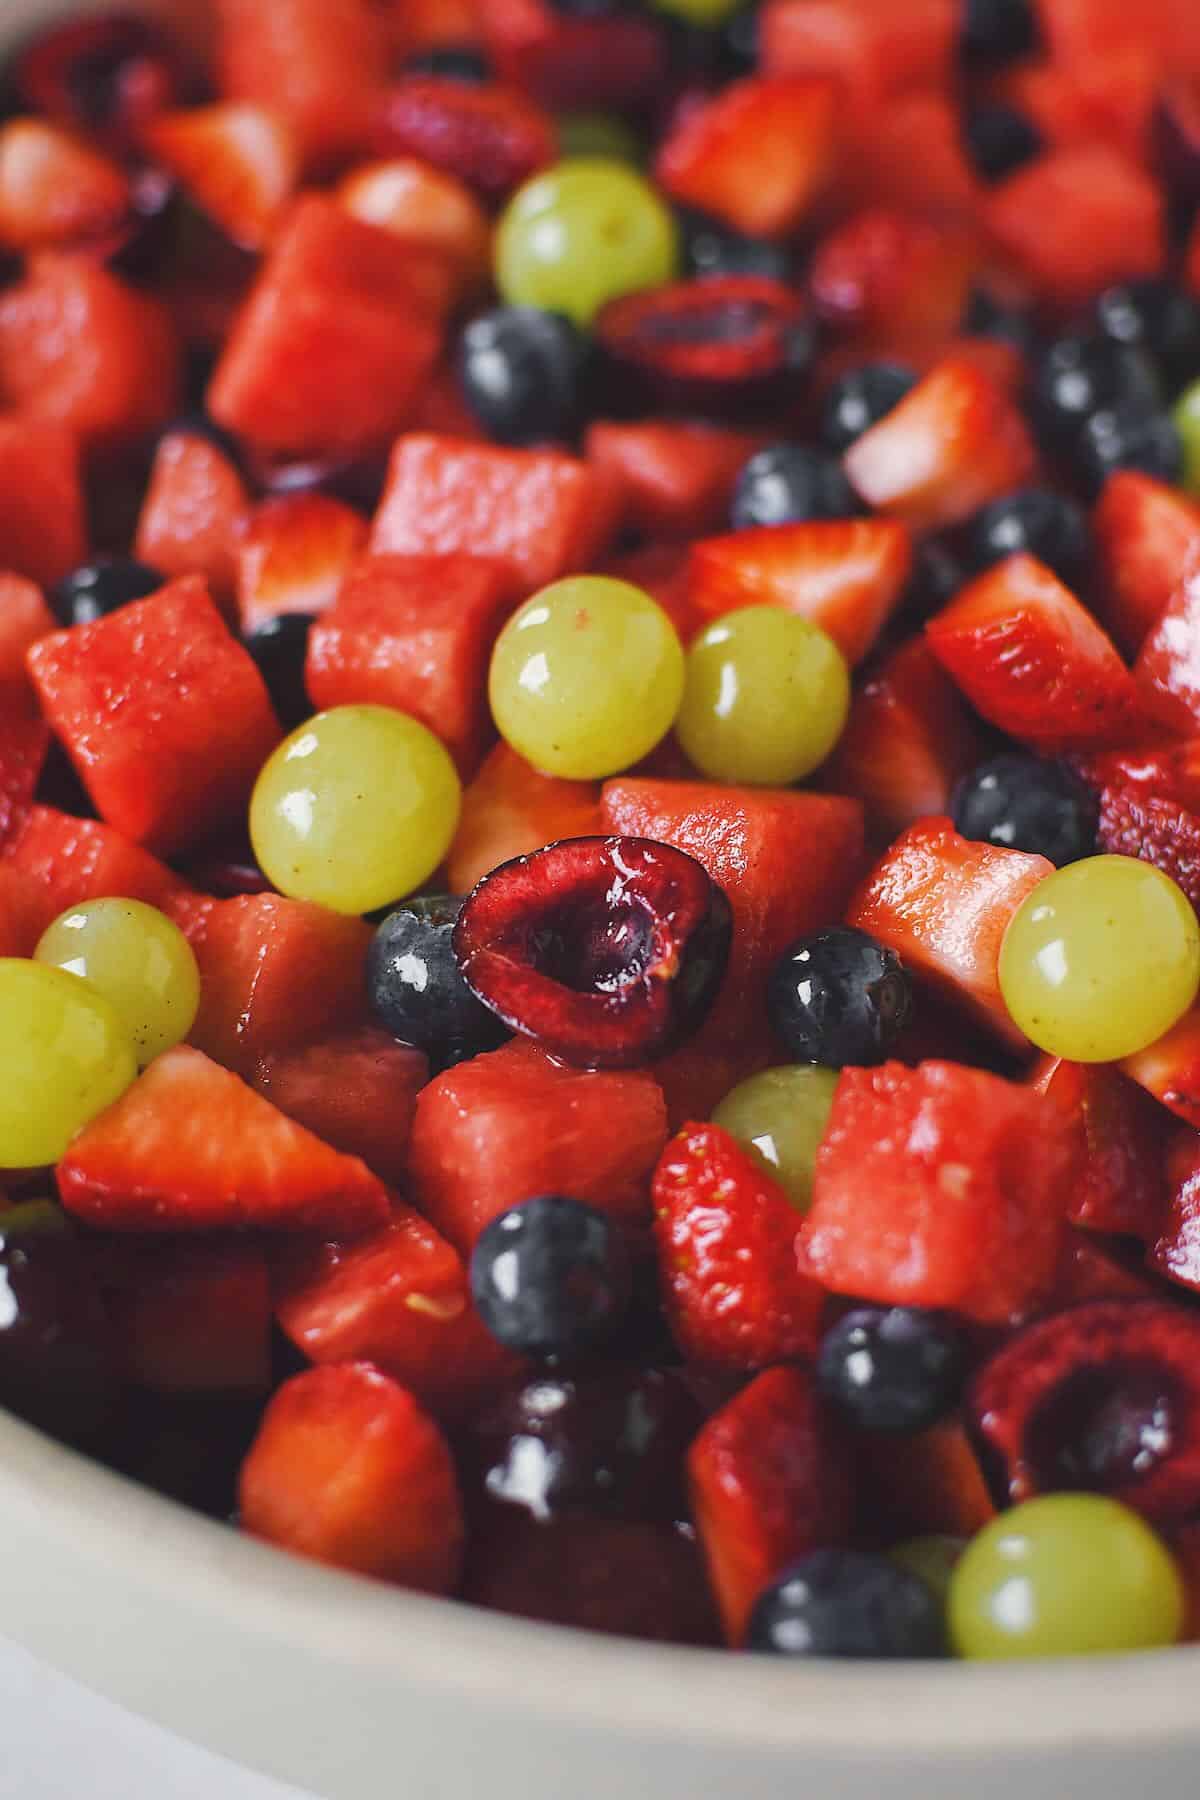 Summer Fruit Salad all tossed together and ready to eat.